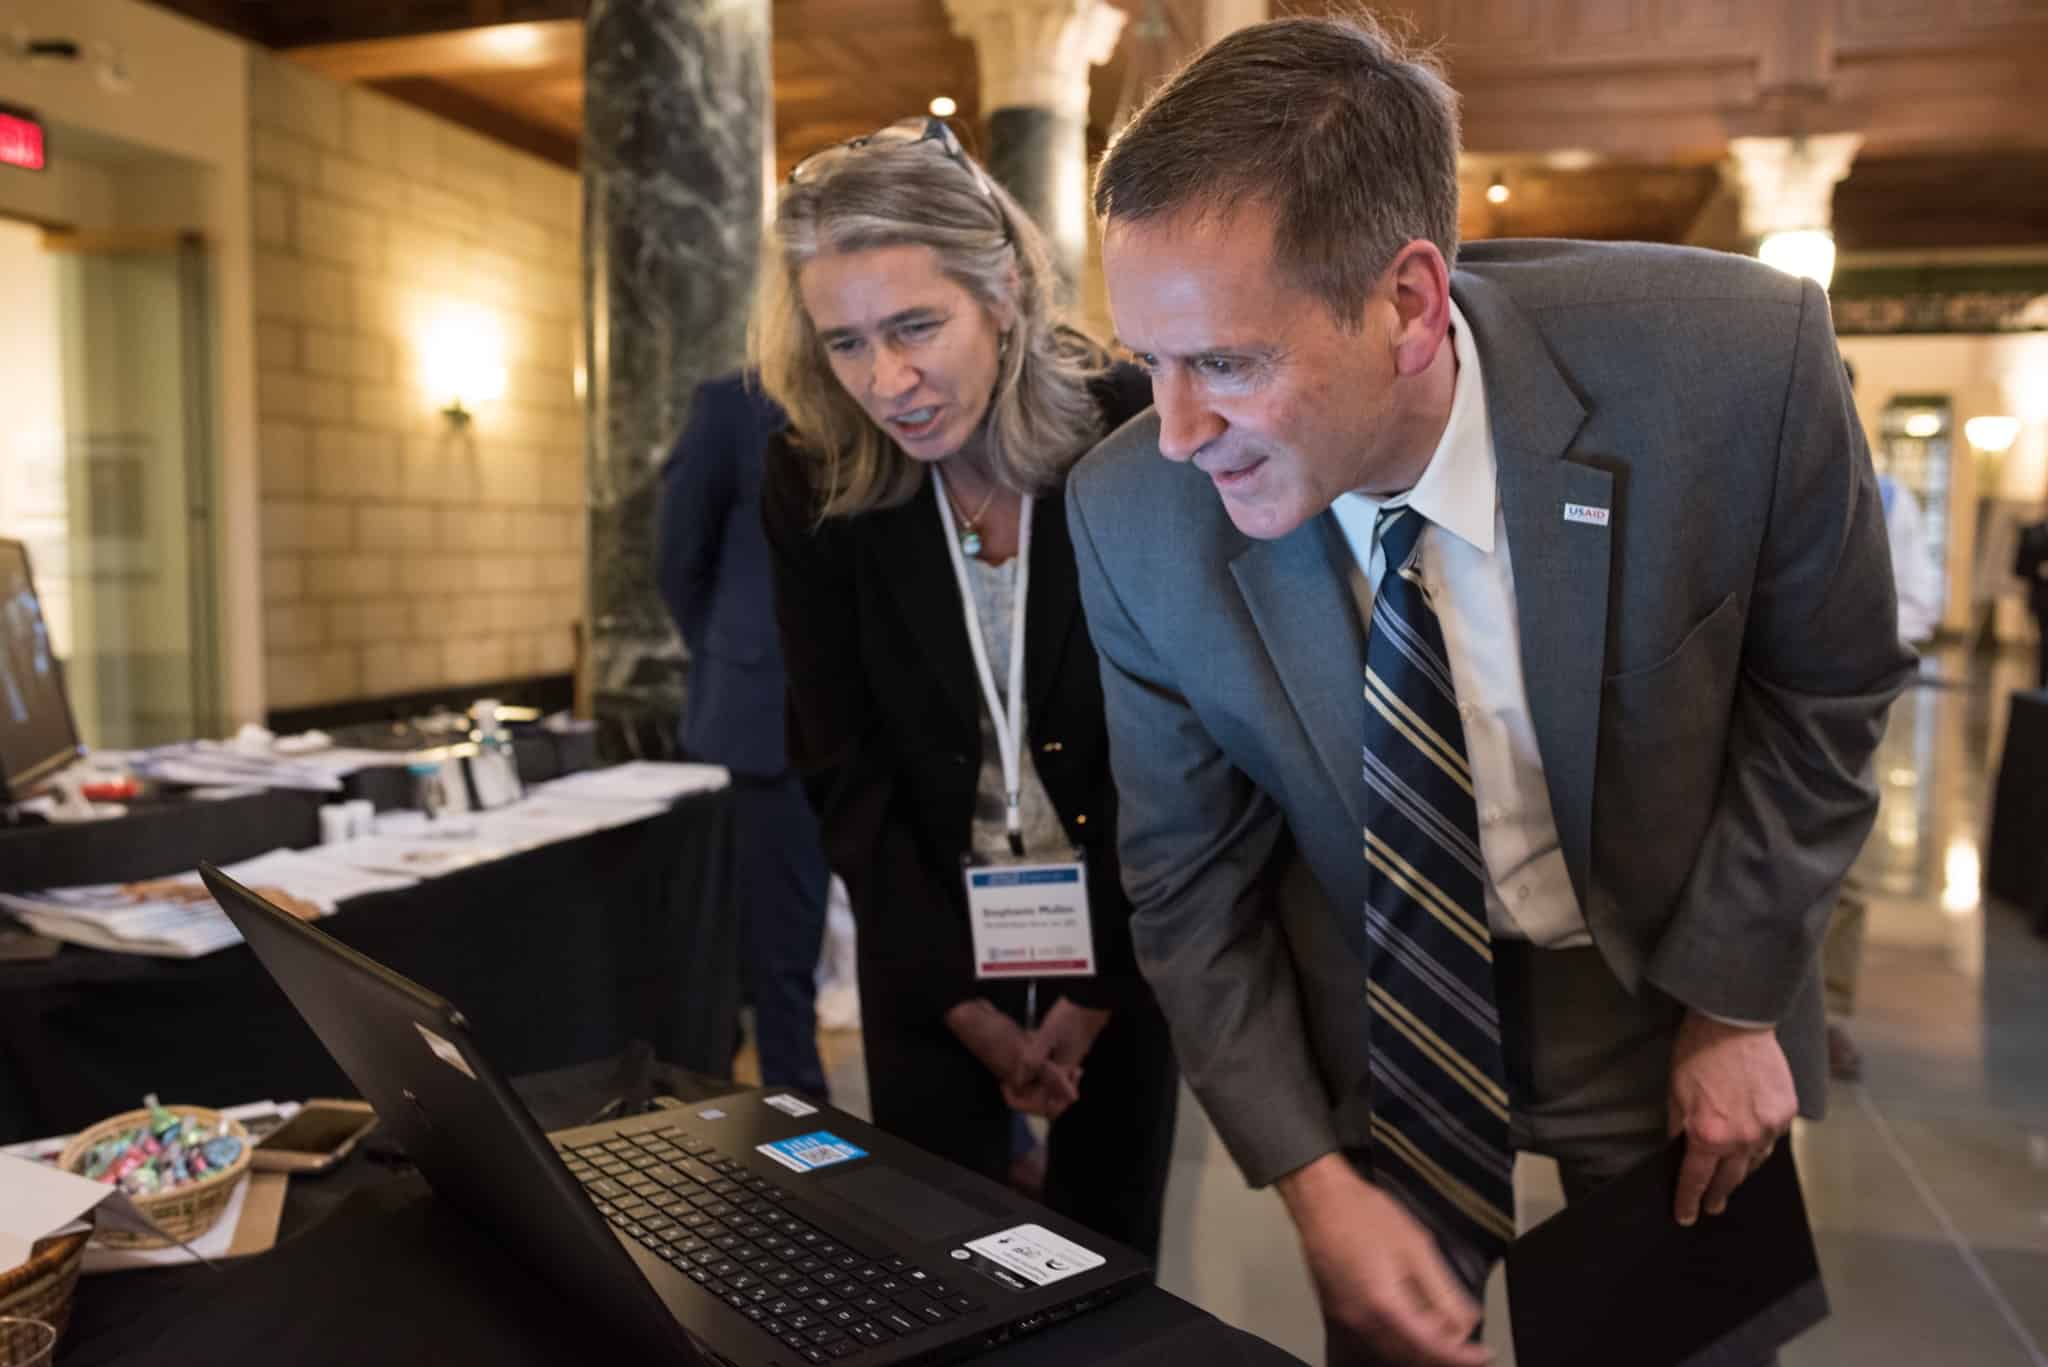 USAID Administrator, Mark Green, launched a website created by the first Accelerator project, TB Data, Impact, Assessment and Communications Hub (TB DIAH).